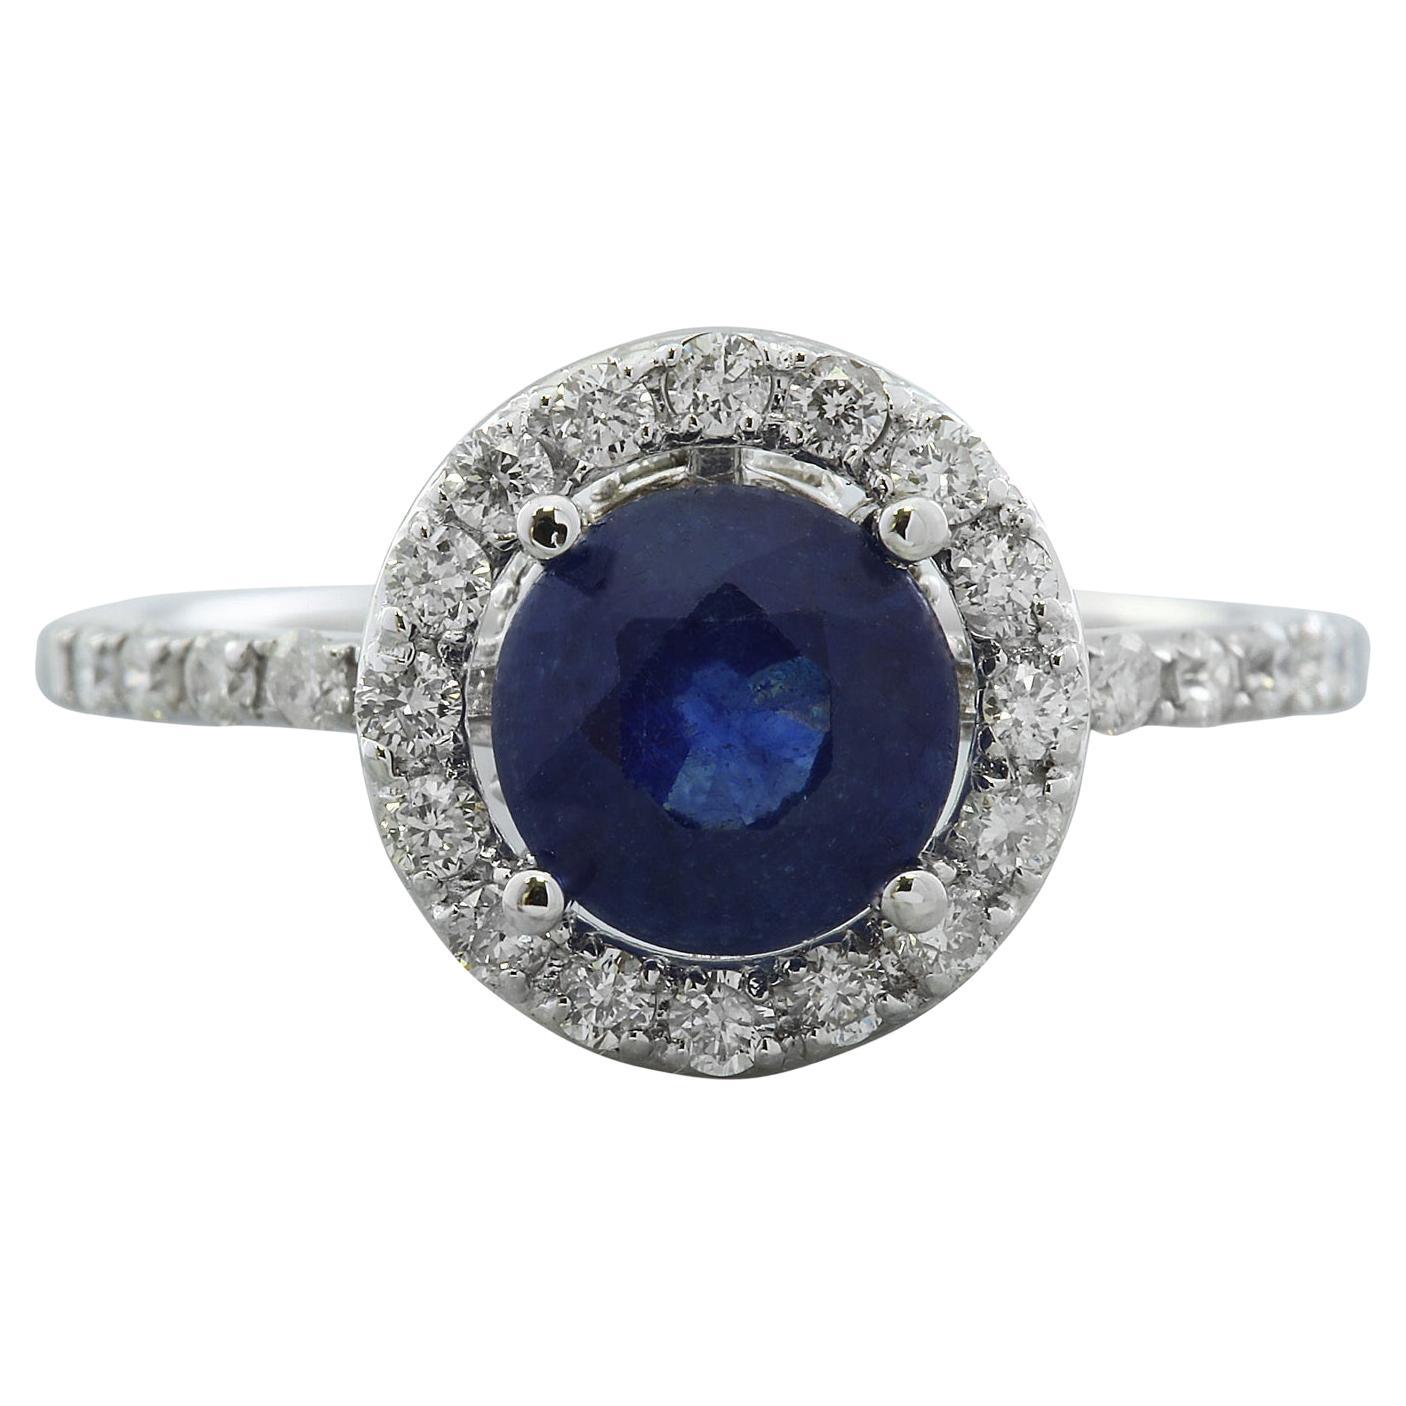 2.61 Carat Natural Sapphire 14 Karat Solid White Gold Diamond Ring For Sale